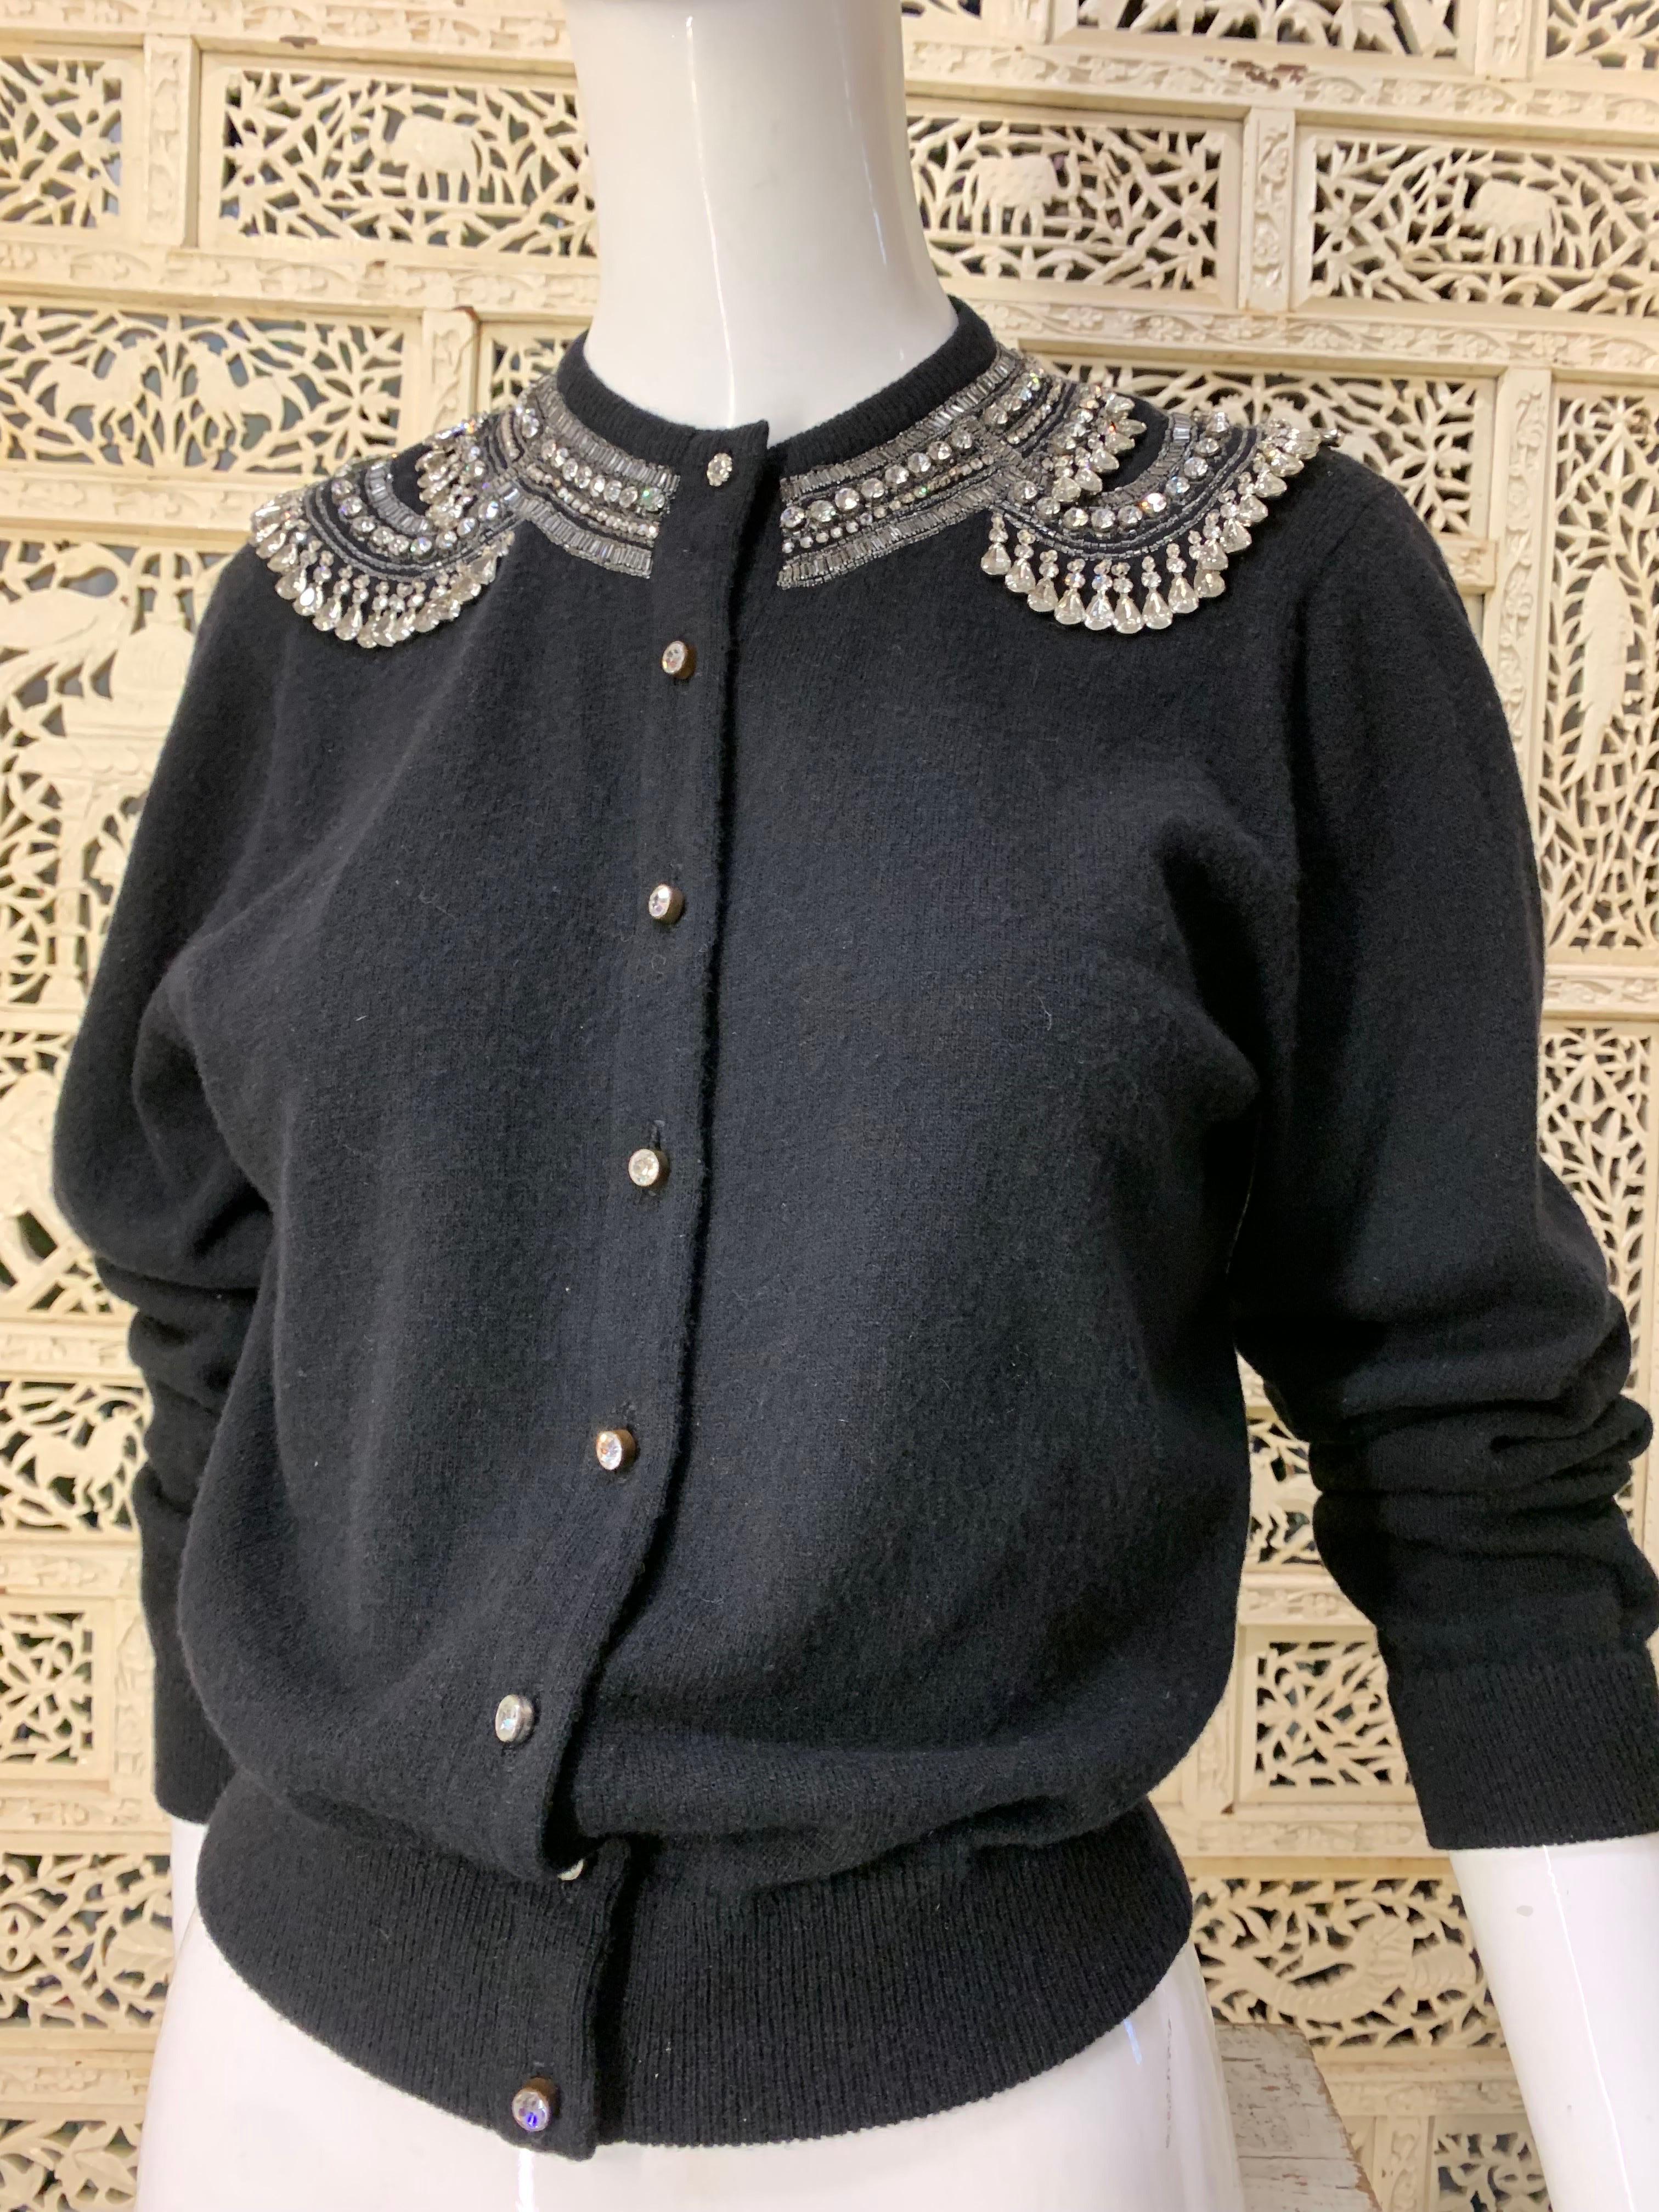 1950s Giovagnoni Black Cashmere Button-Up Sweater w Tear-Drop Rhinestone Fringe: Rhinestone buttons with extravagant bib-style rhinestone shoulders and collar. Unlined. Mint-Condition. US size Medium.